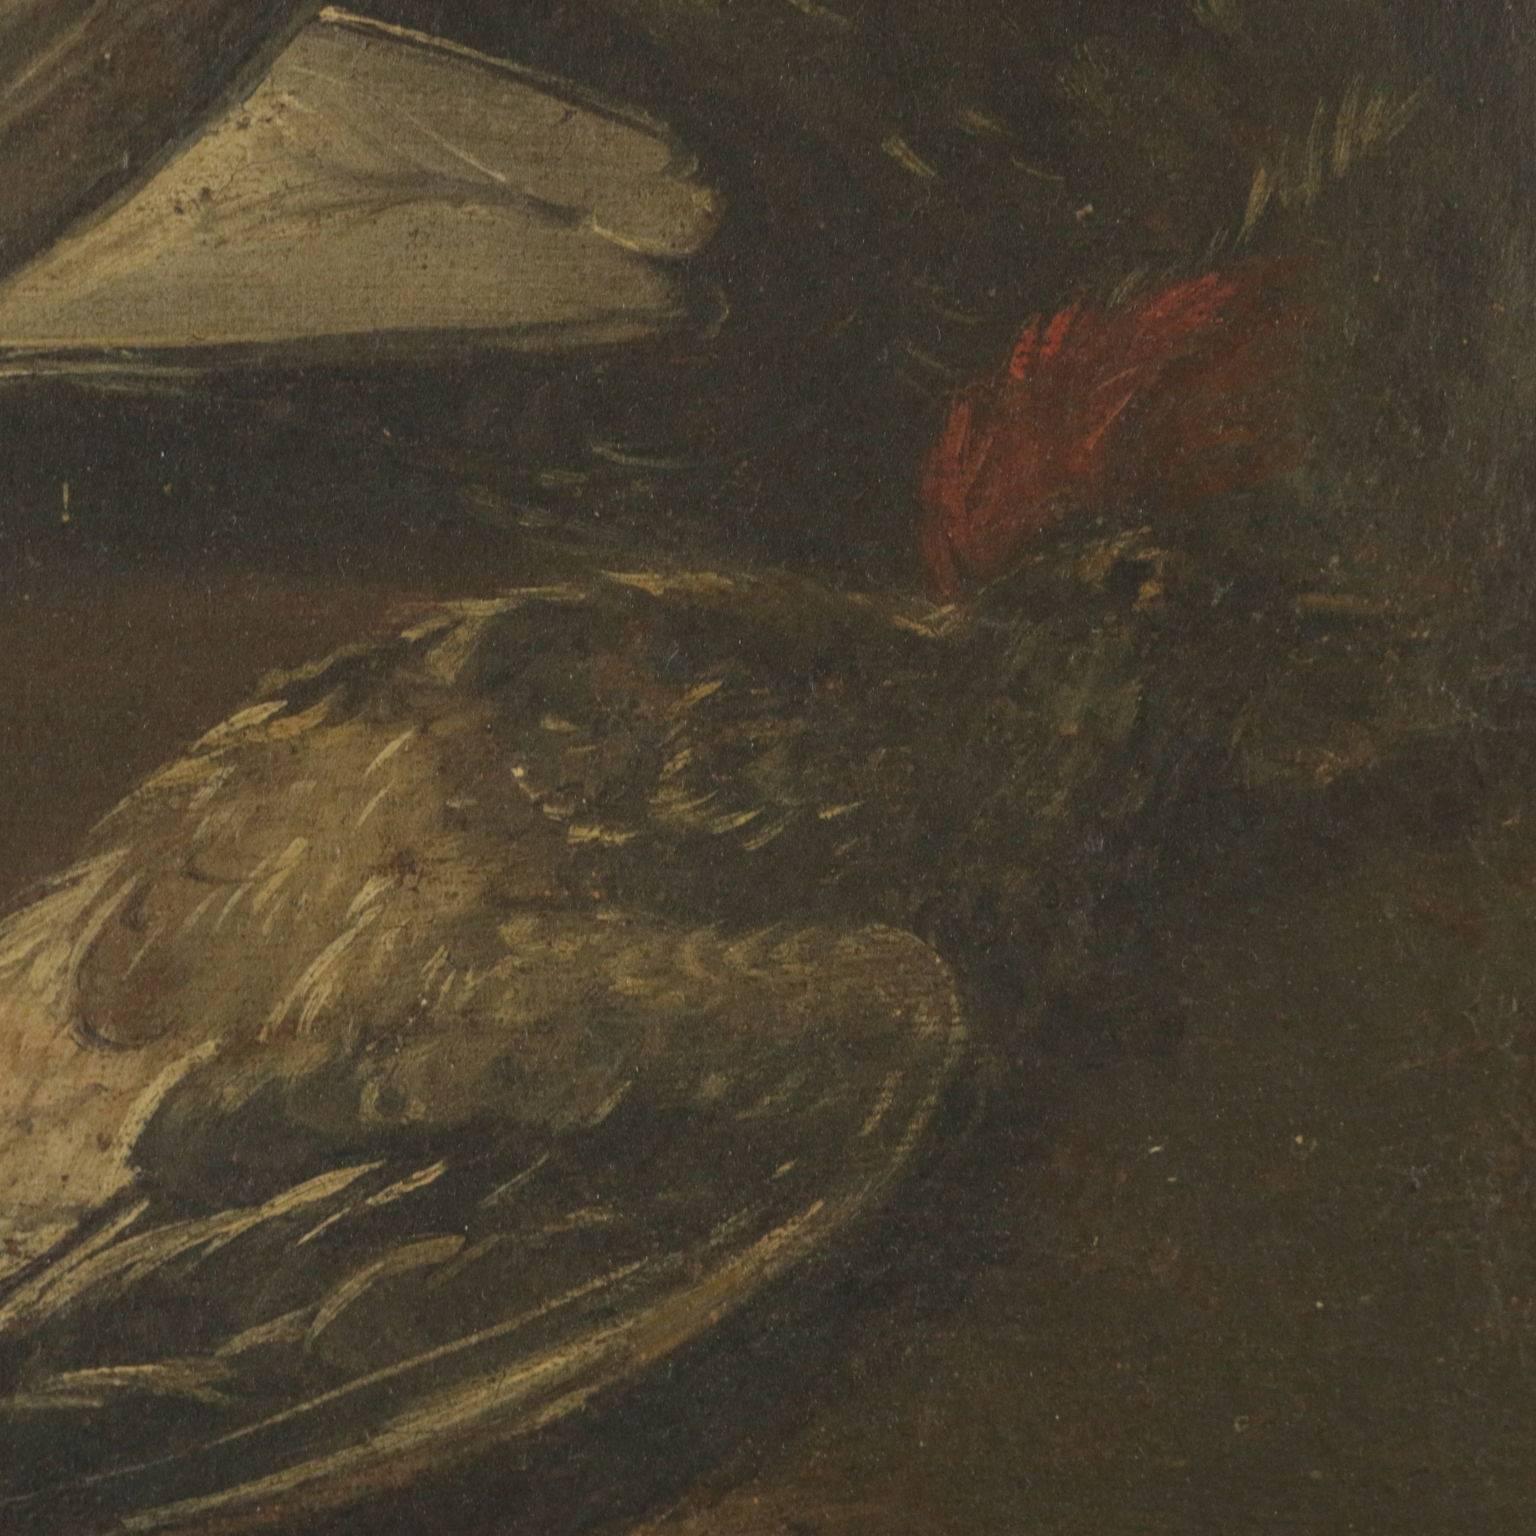 Oil on canvas. The painting recalls those made by Felice Boselli (1650-1732) considering its style and subject. In this painting there is a strong contrast between the dark dead birds and the two white lively doves. Restored and relined, it is